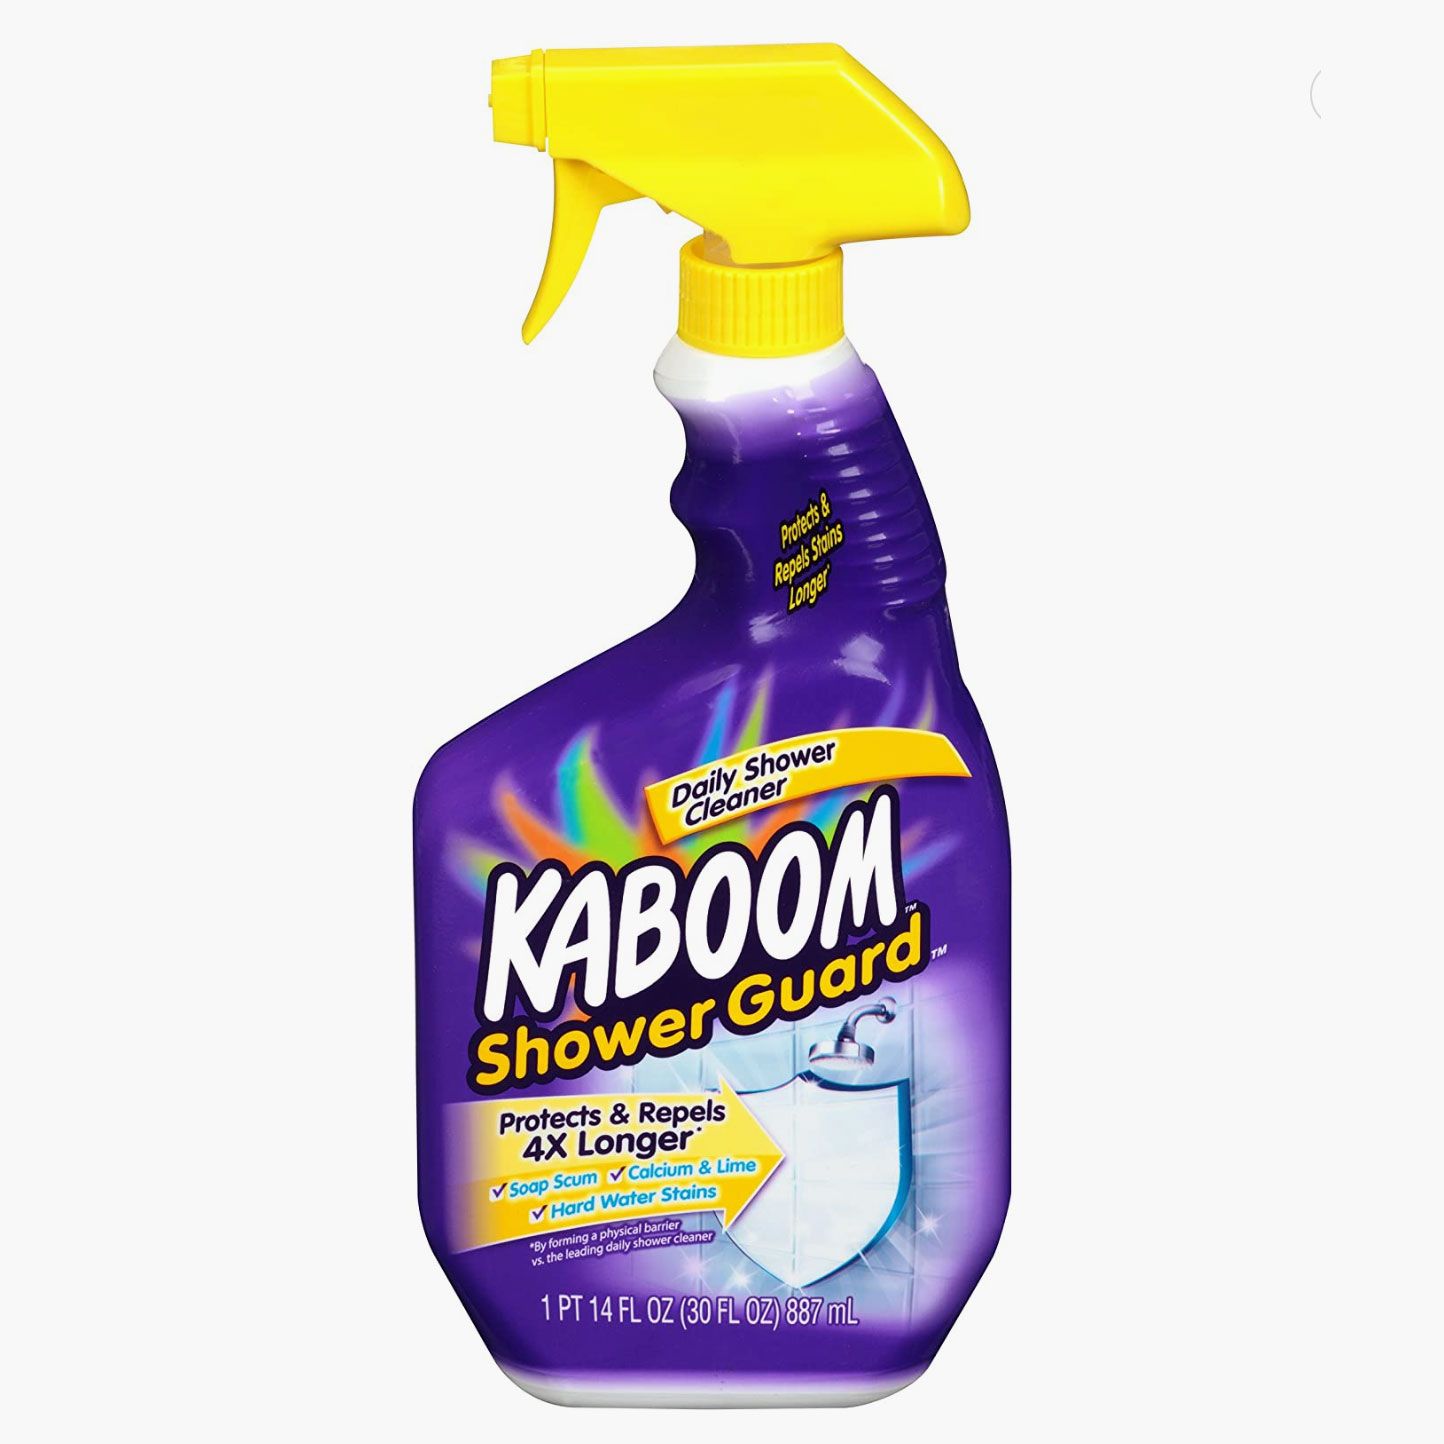 19 Best Cleaning Products for Your Home